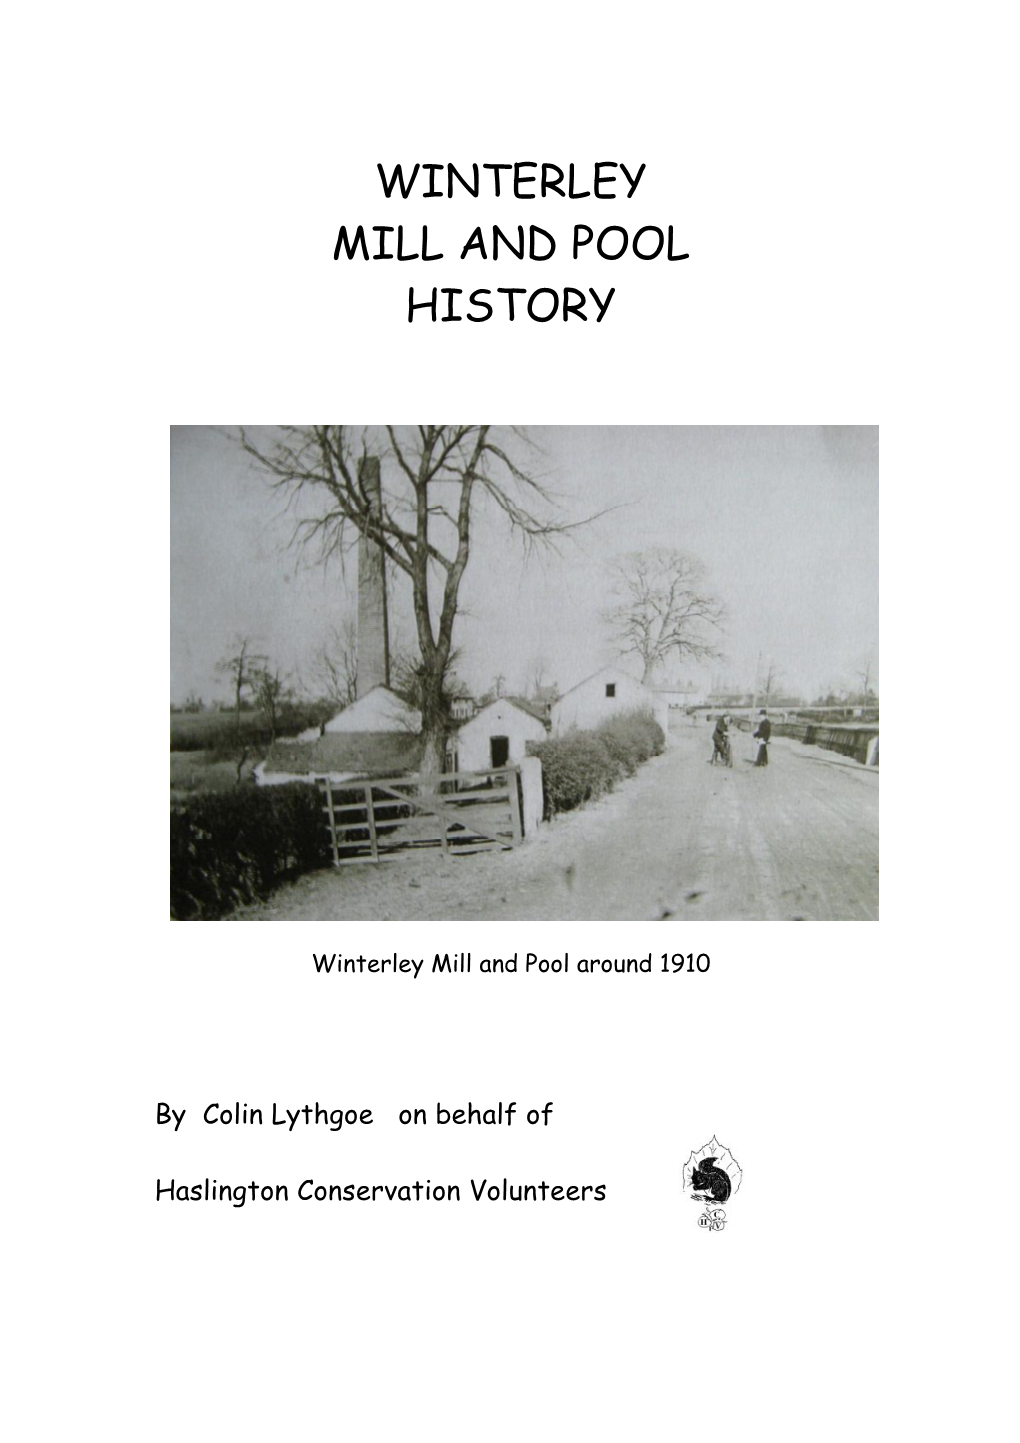 Winterley Mill and Pool History